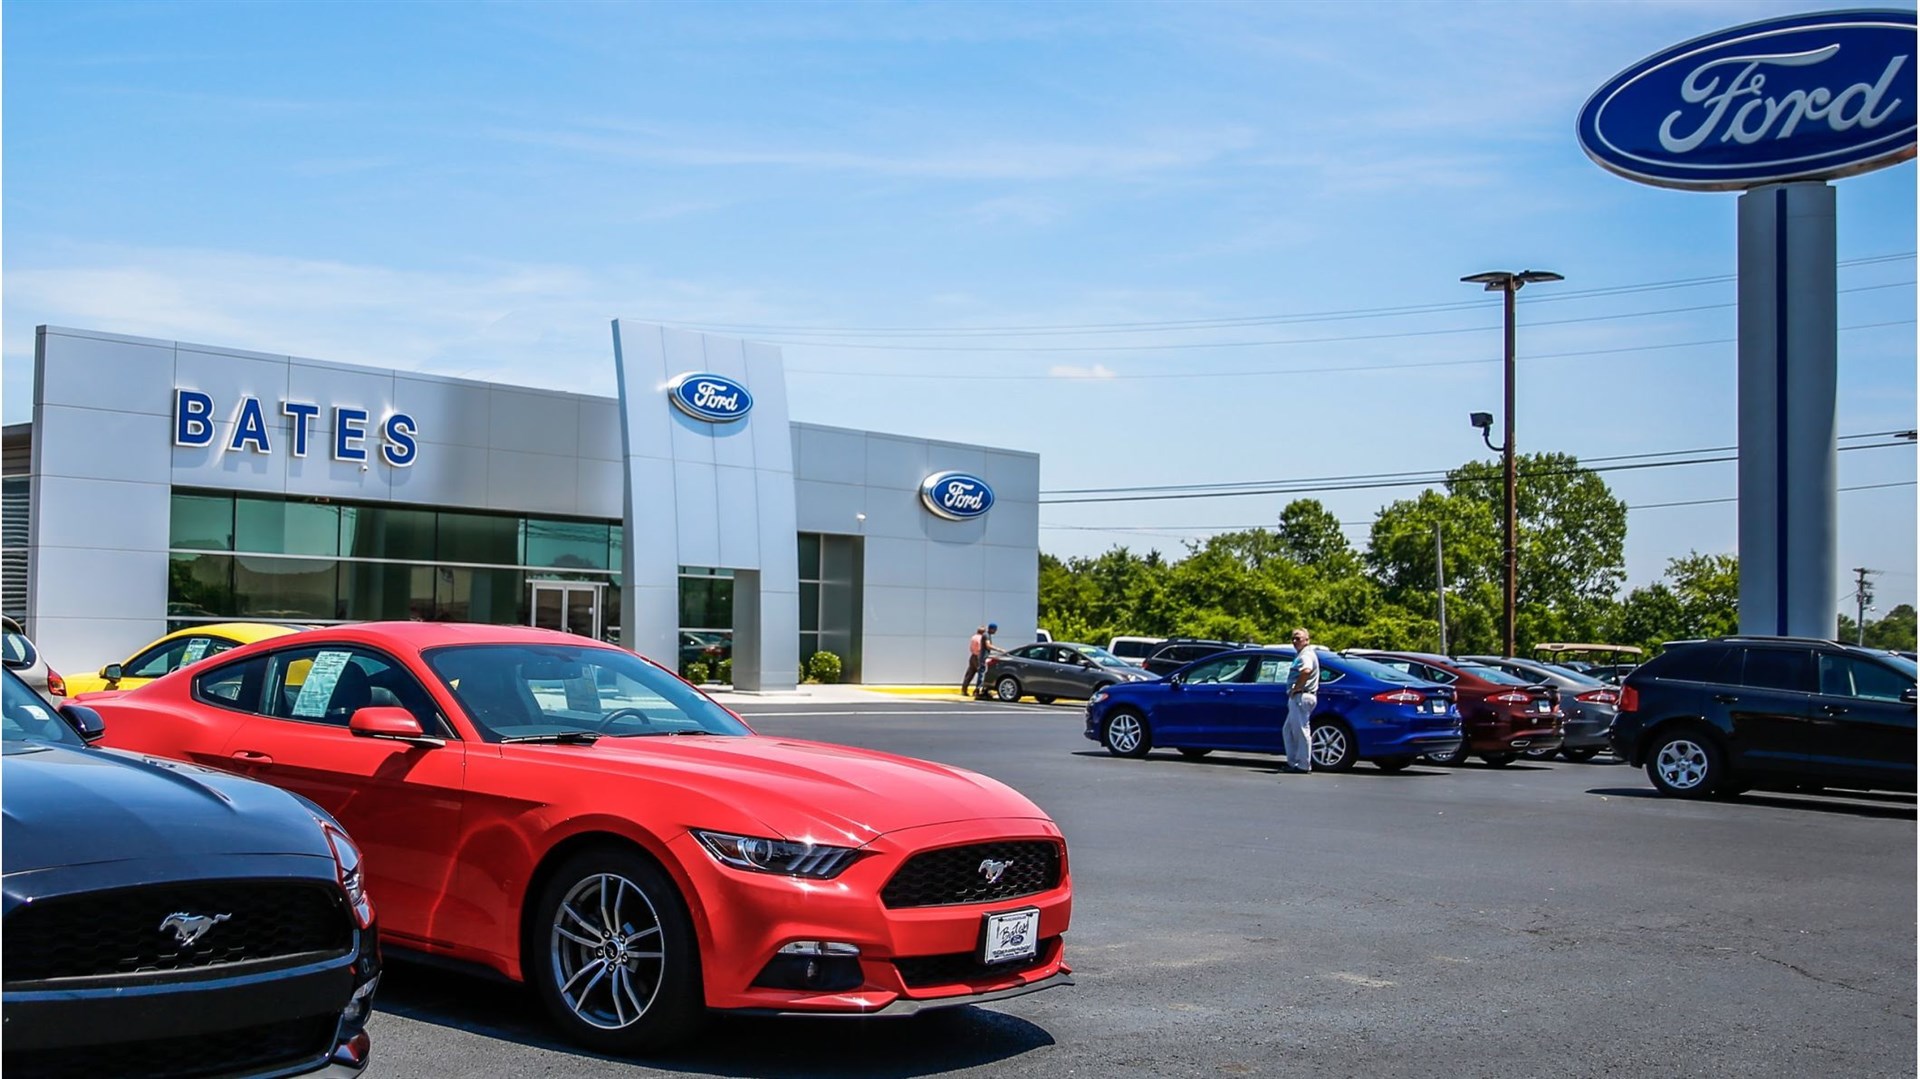 Bates Ford Best Ford Dealer In Lebanon Tennessee